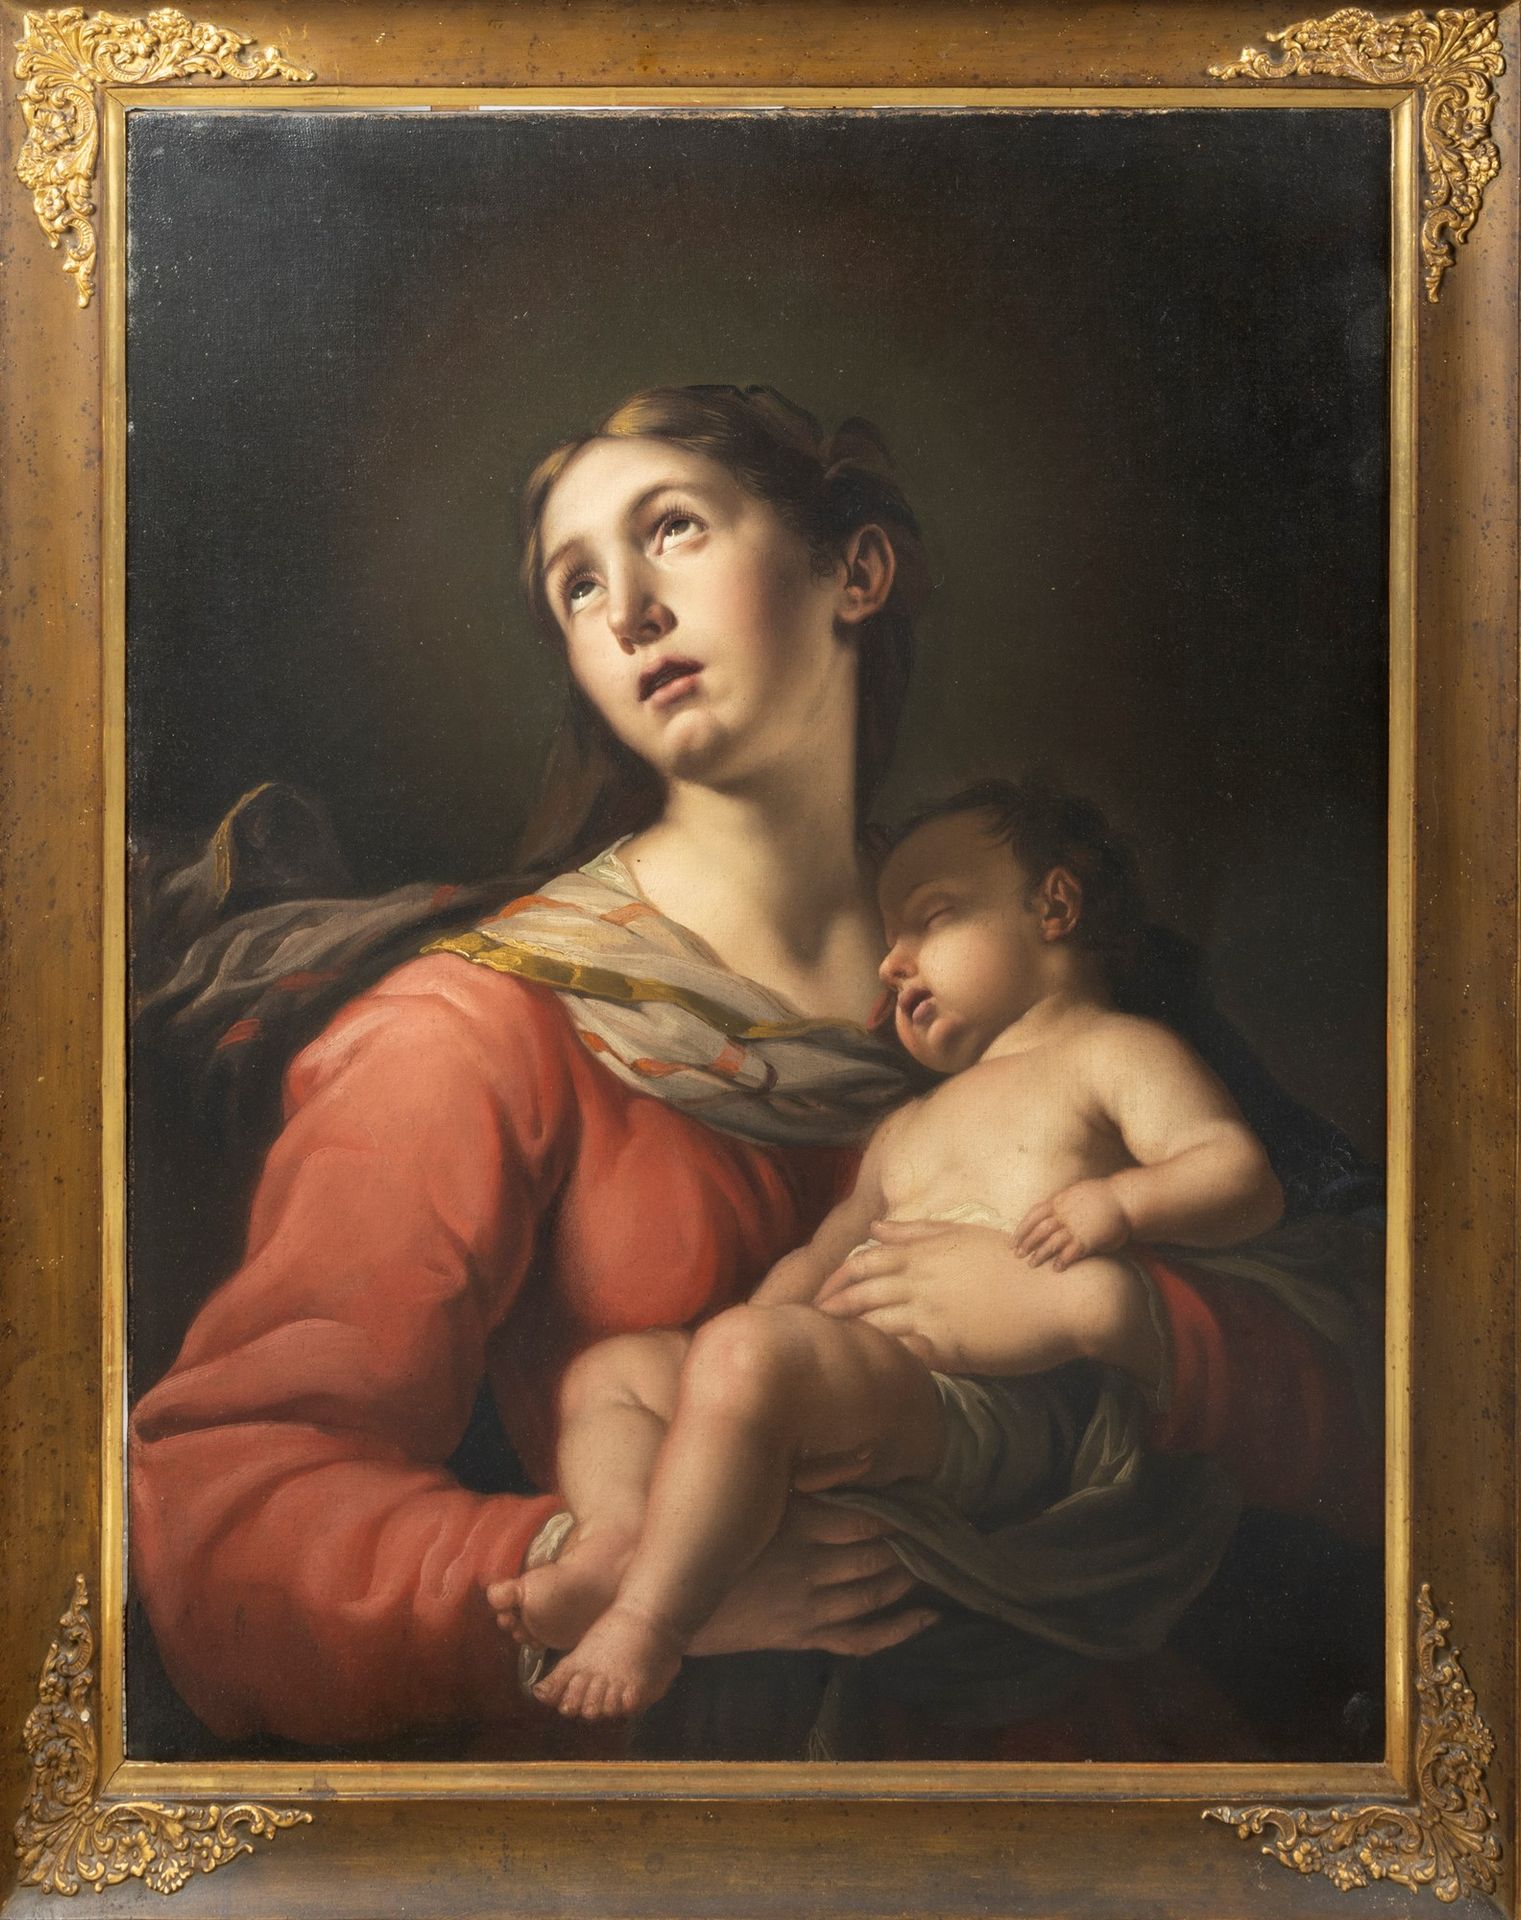 Null Scuola toscana, secolo XVIII - Madonna with Child

oil on canvas
80 x 63 cm